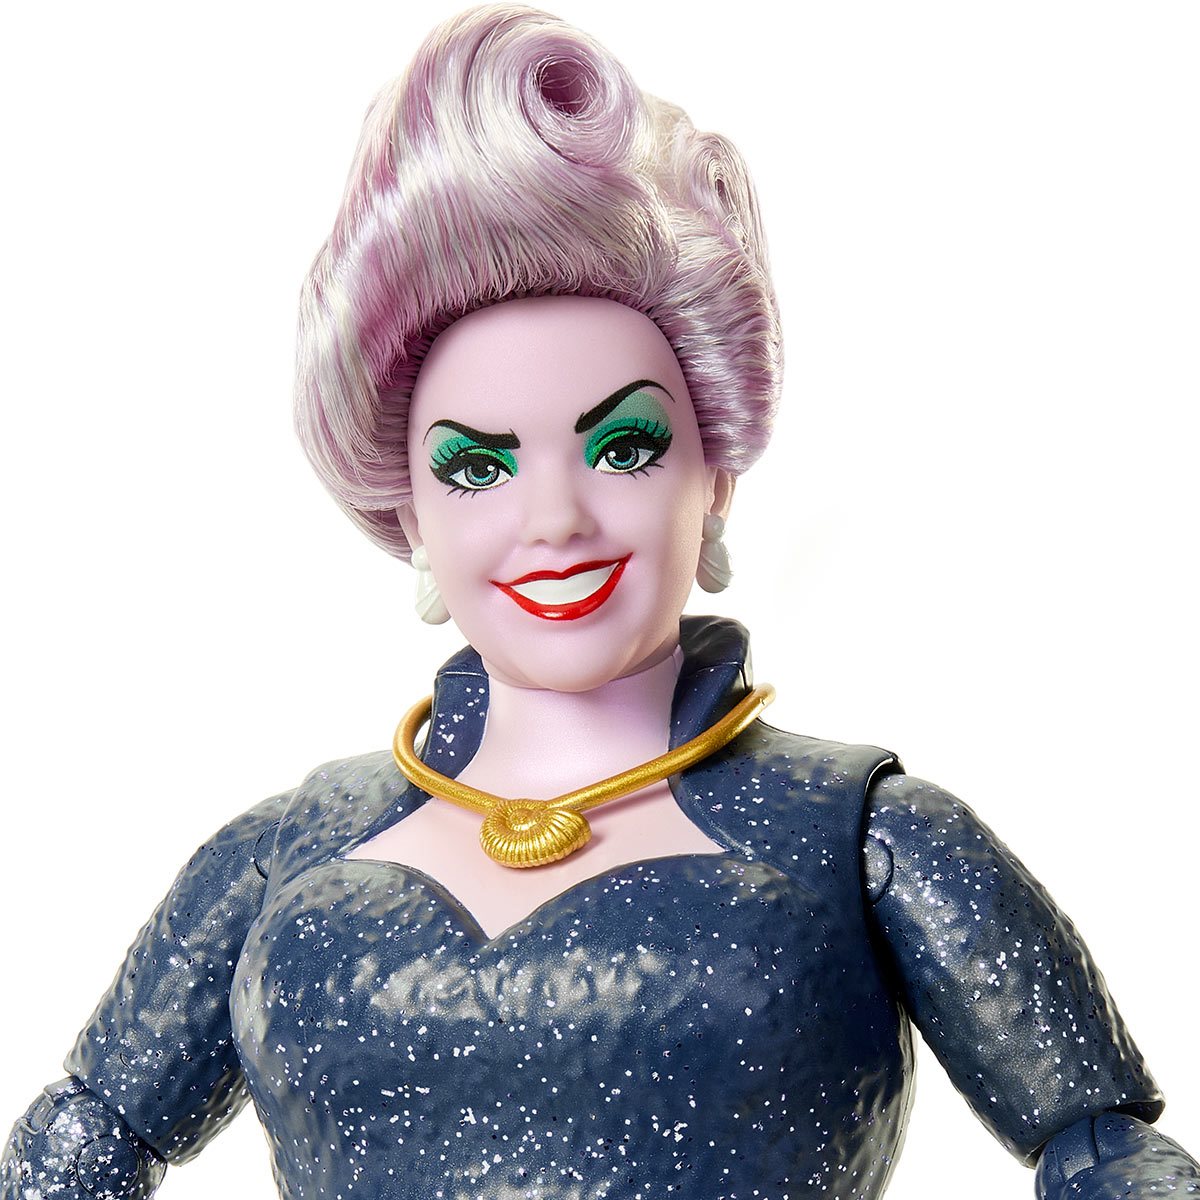 Who plays Ursula in the new Little Mermaid?